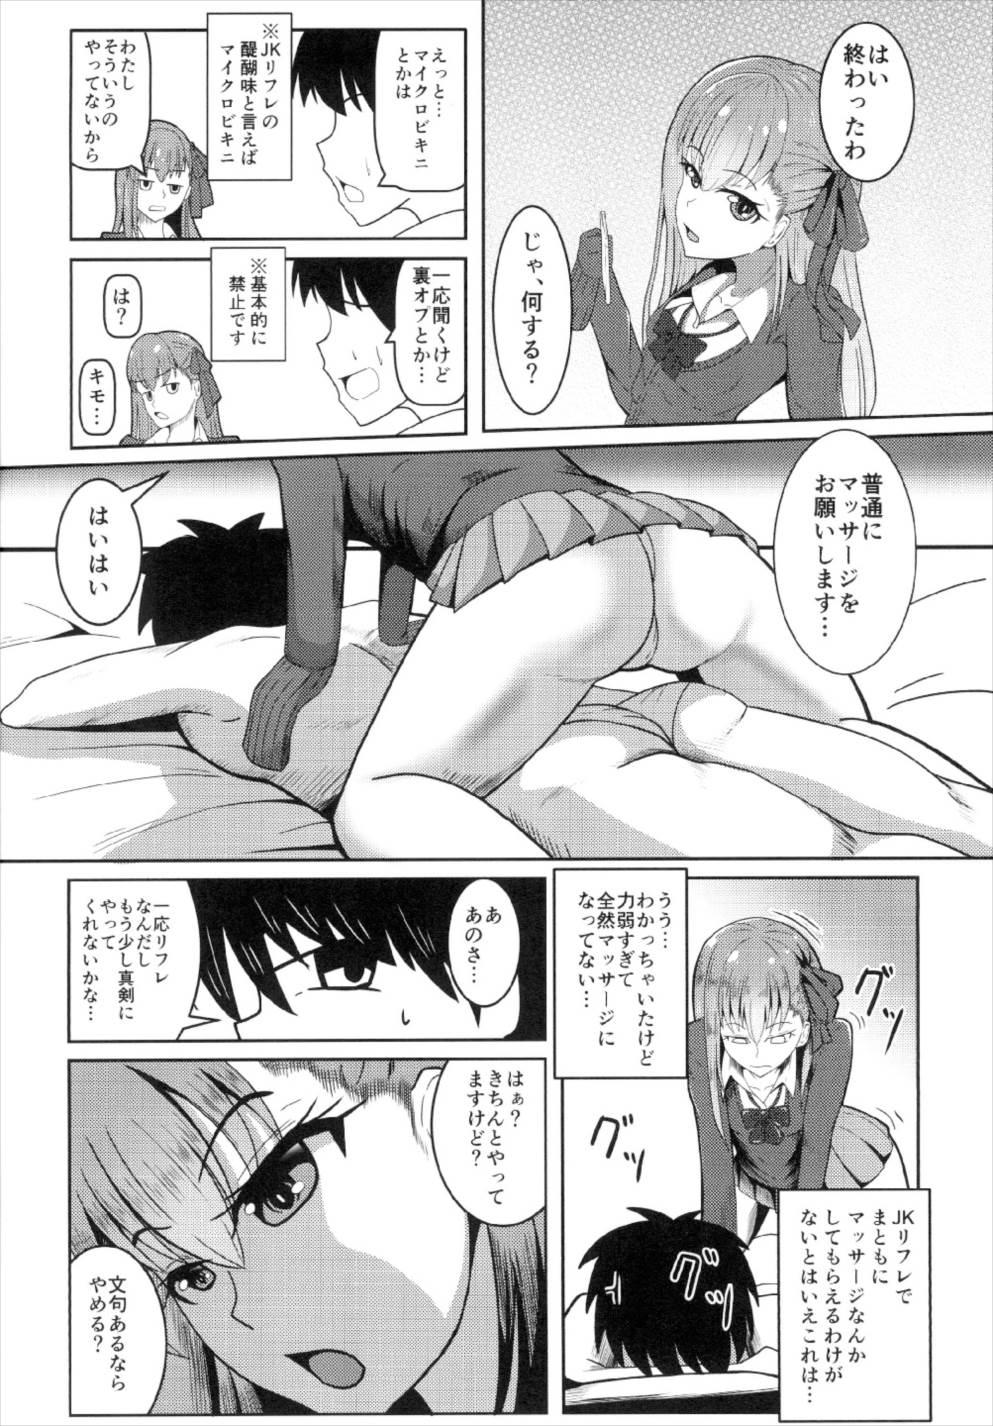 Str8 Chaldea JK Collection Vol. 2 Meltlilith - Fate grand order Roleplay - Page 4